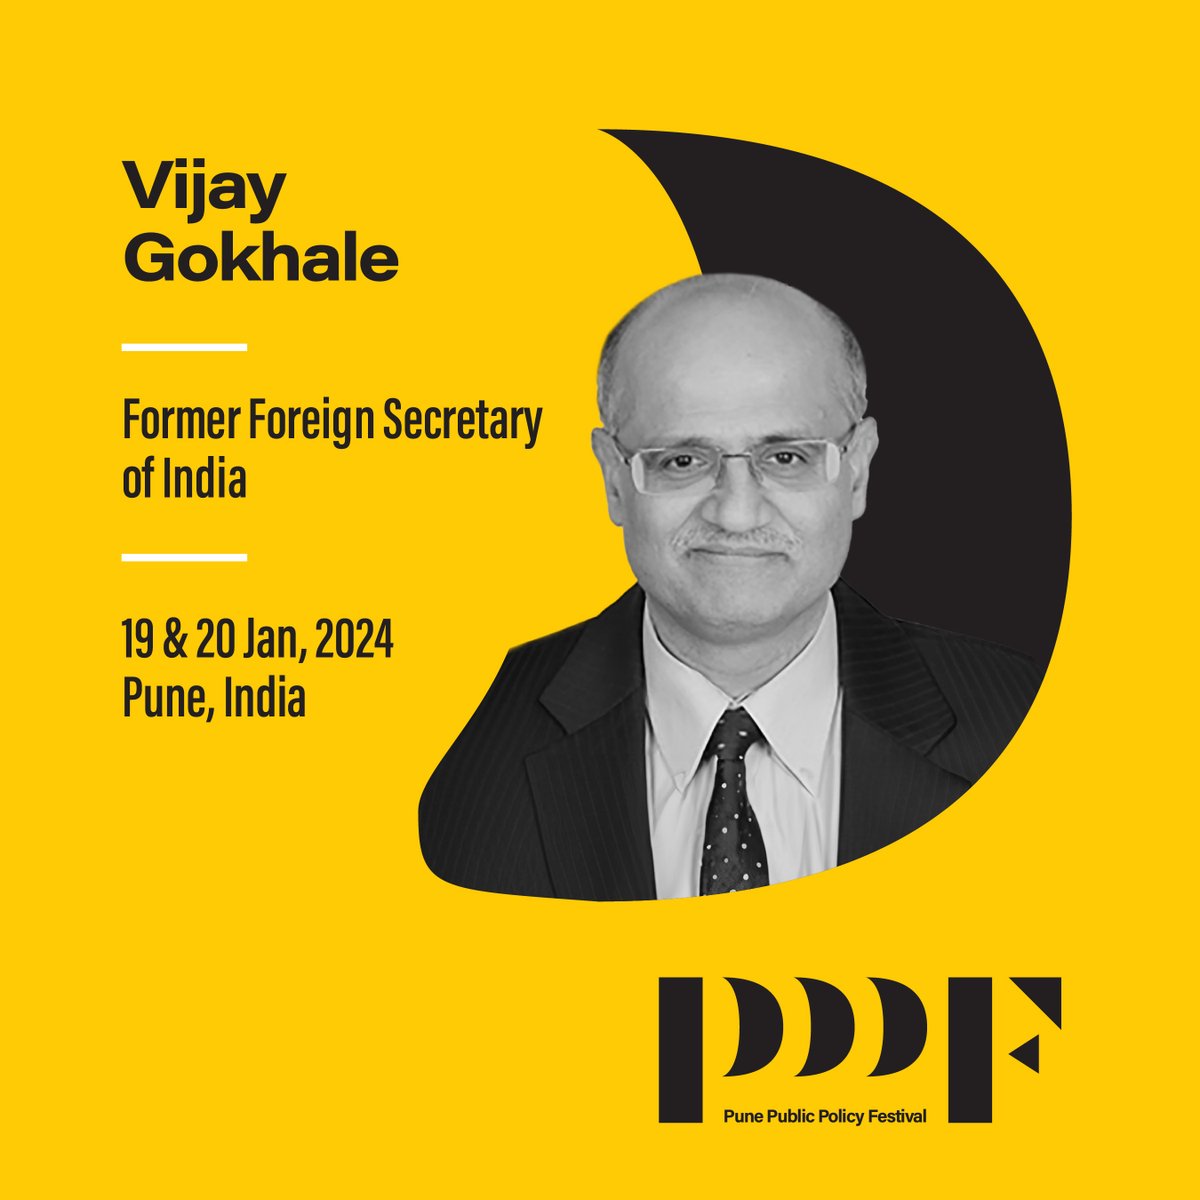 #MeetTheSpeaker

Vijay Keshav Gokhale IFS, distinguished former diplomat, served as the Foreign Secretary of India during his illustrious 39 year diplomatic career. Before his role as Foreign Secretary, Mr. Gokhale held key positions, including India’s high commissioner to